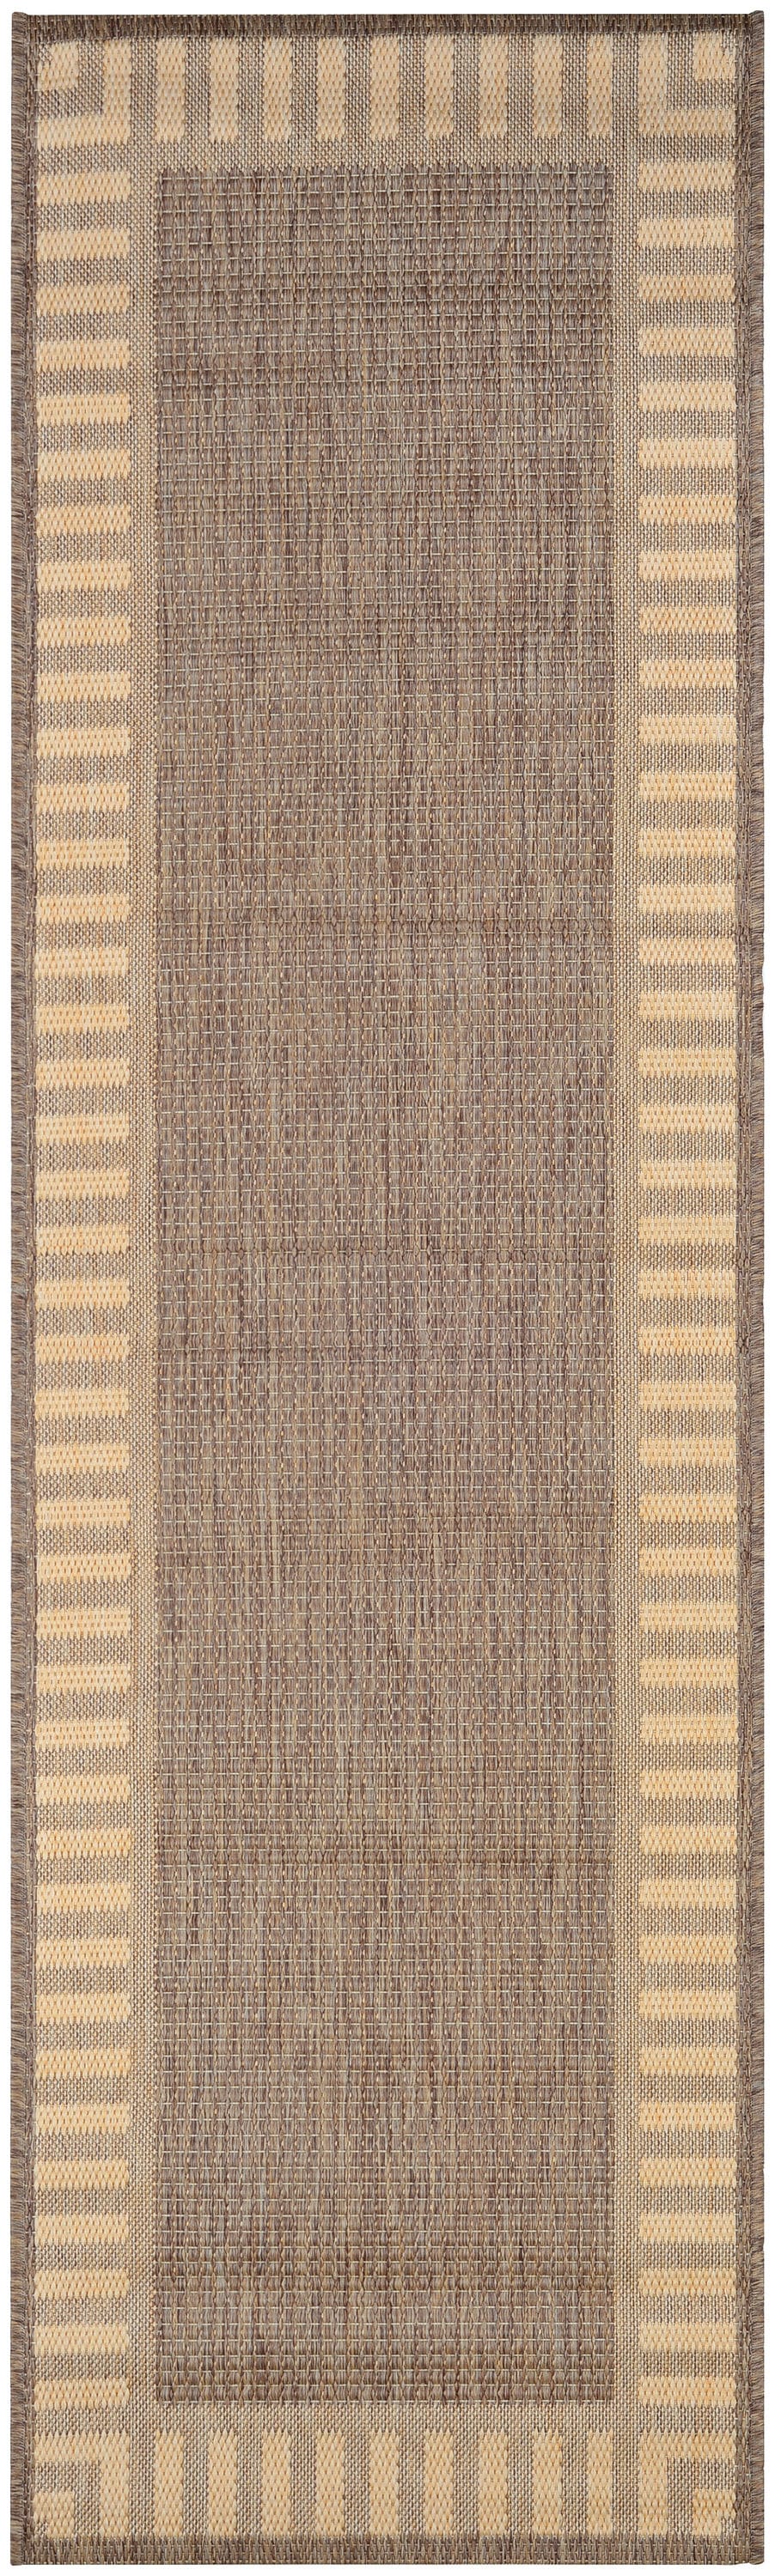 Couristan Recife Wicker Stitch Cocoa-Natural 6 ft. x 9 ft. Indoor